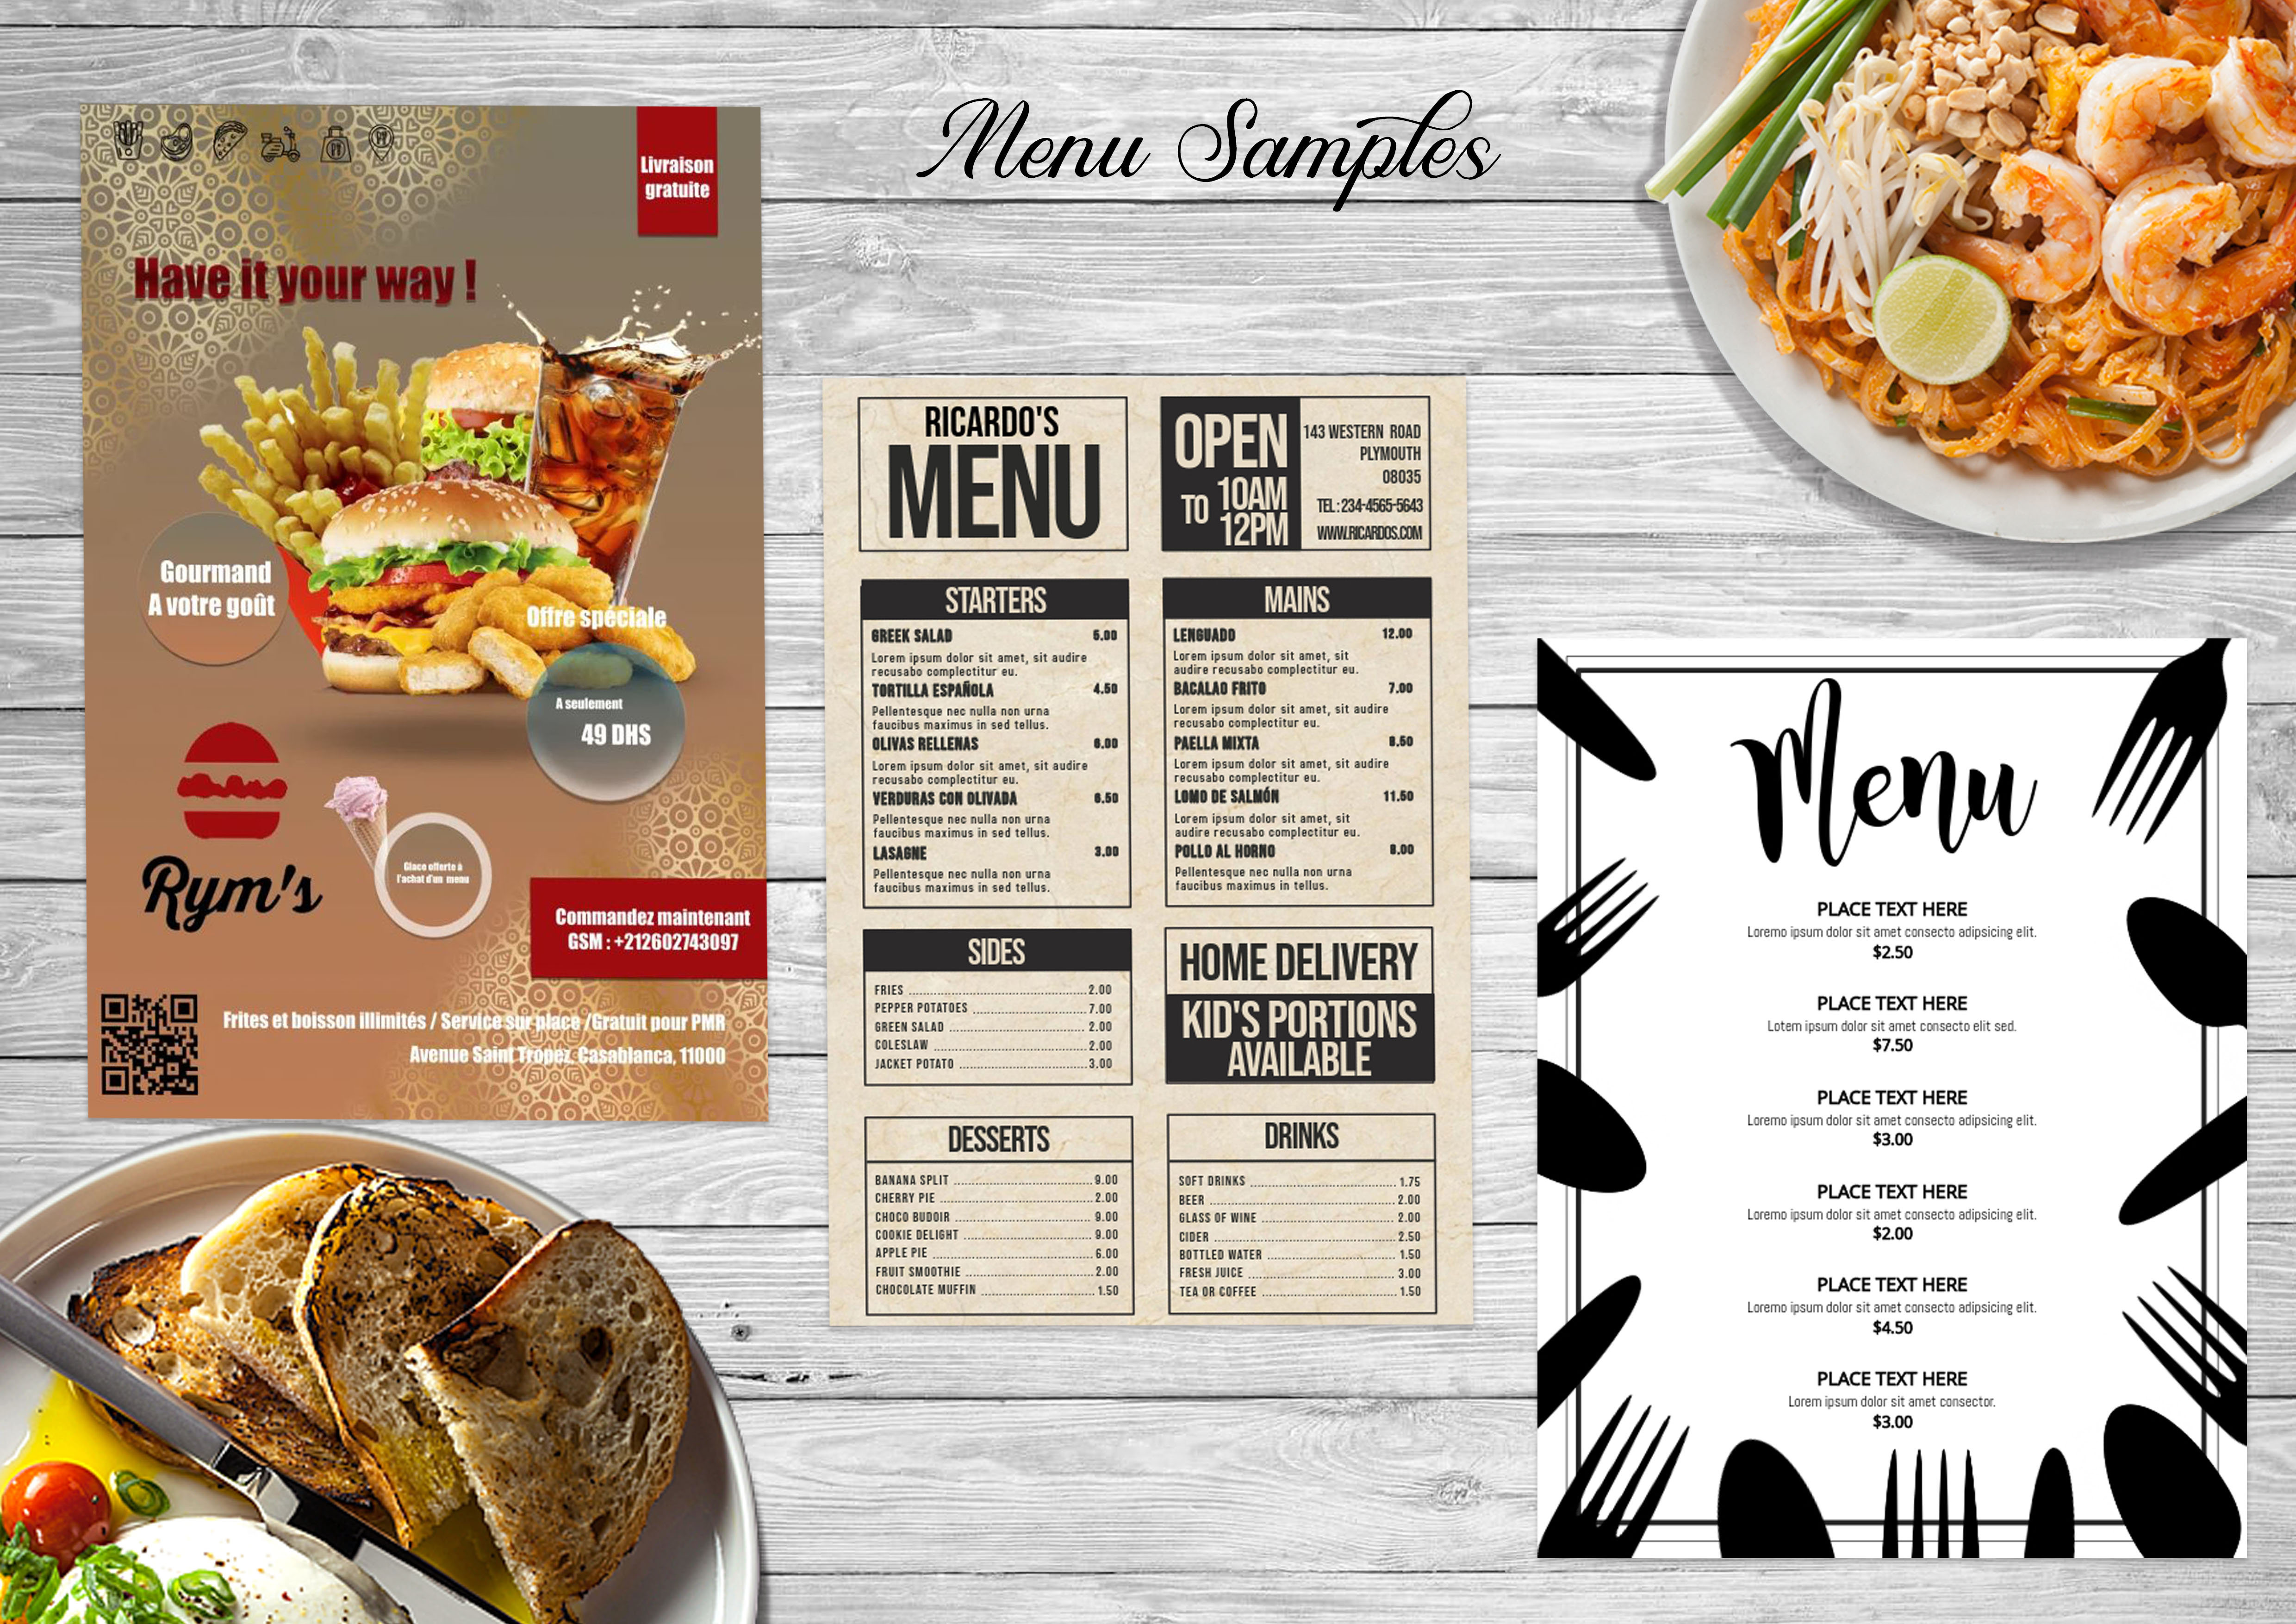 Great restaurant menus and flyers within 4 hours for $5 - SEOClerks